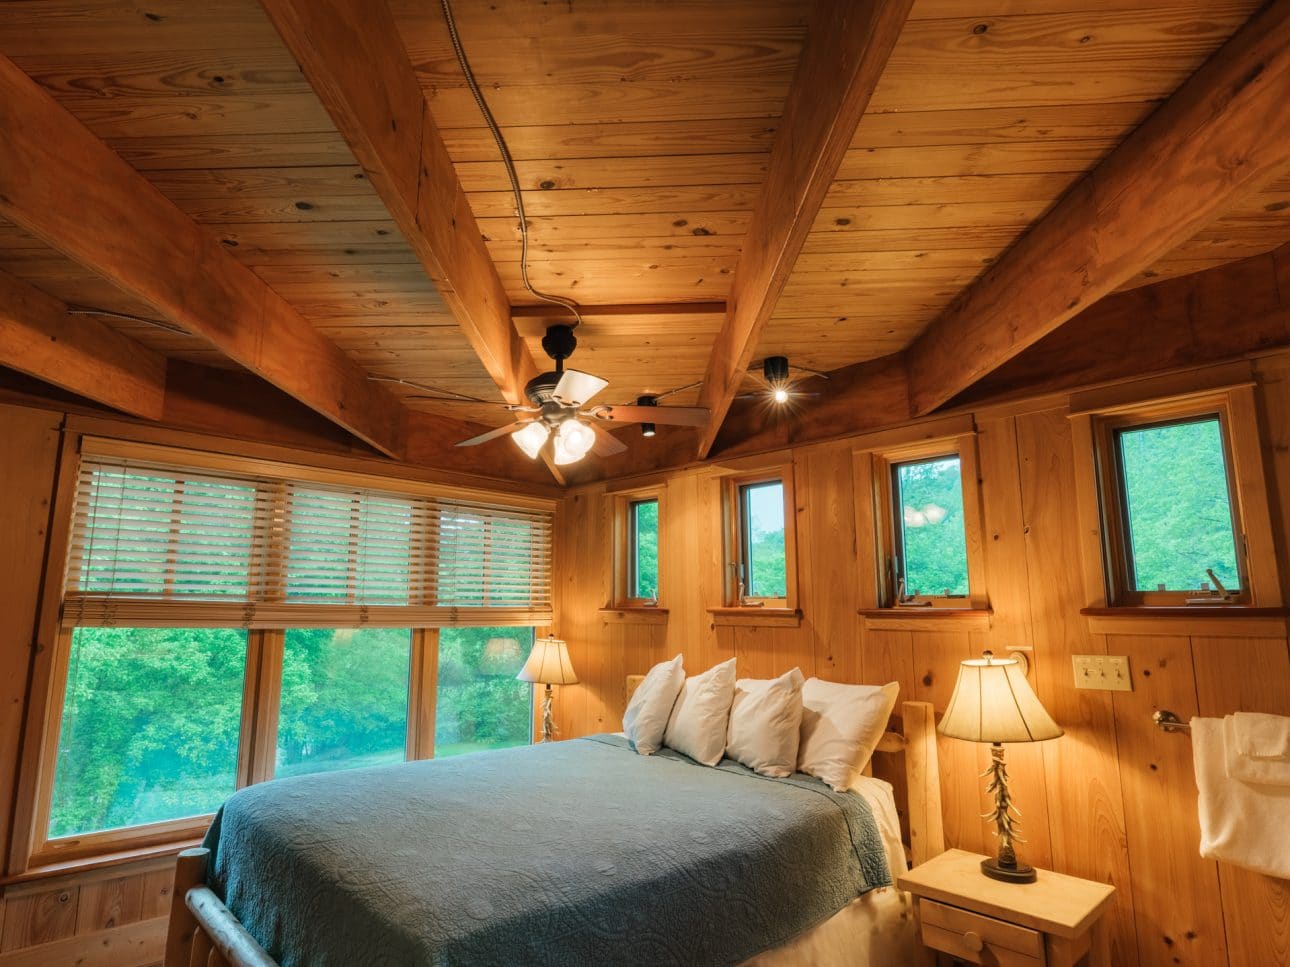 One of the beautiful bedrooms in the Ponca Creek Lodge